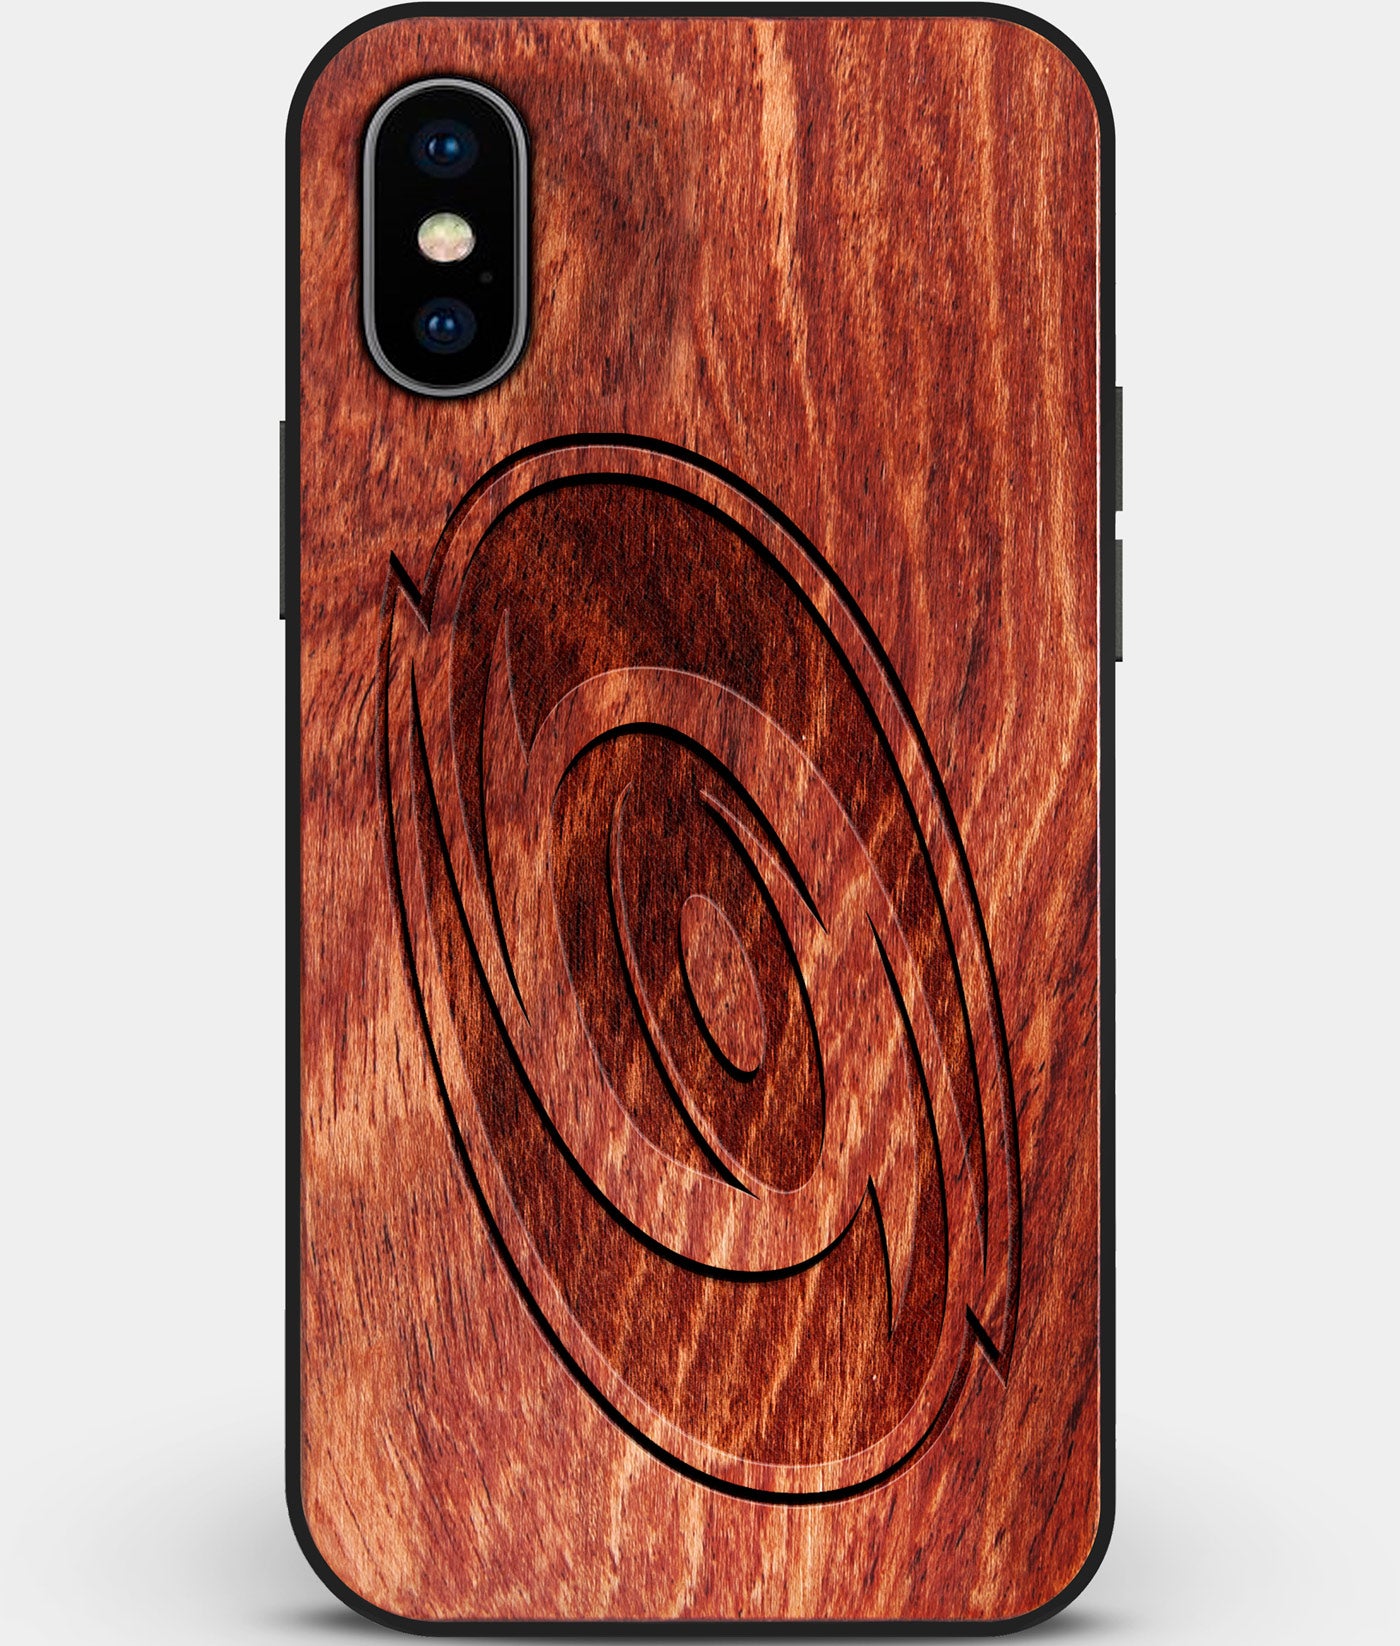 Custom Carved Wood Carolina Hurricanes iPhone XS Max Case | Personalized Mahogany Wood Carolina Hurricanes Cover, Birthday Gift, Gifts For Him, Monogrammed Gift For Fan | by Engraved In Nature